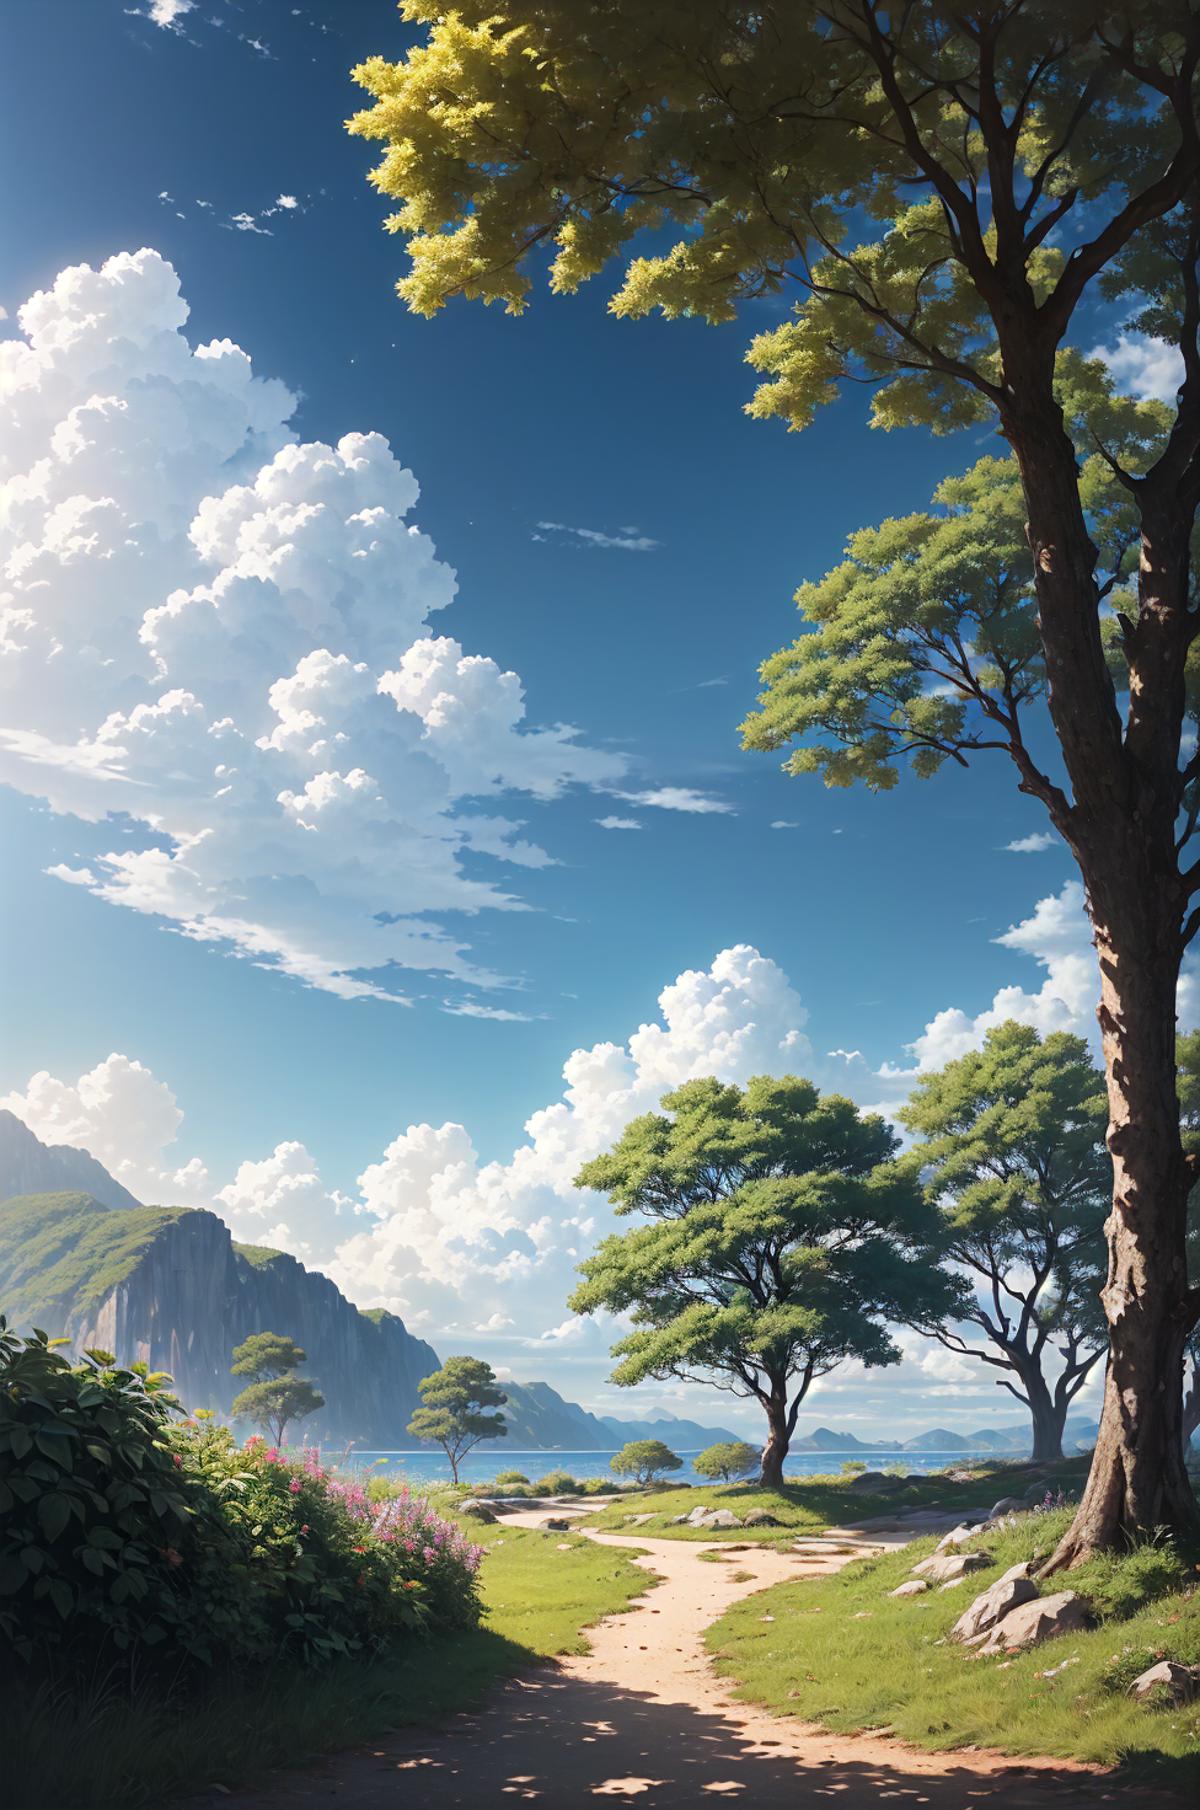 A serene scene of a mountain range with a blue sky, white clouds, and trees.